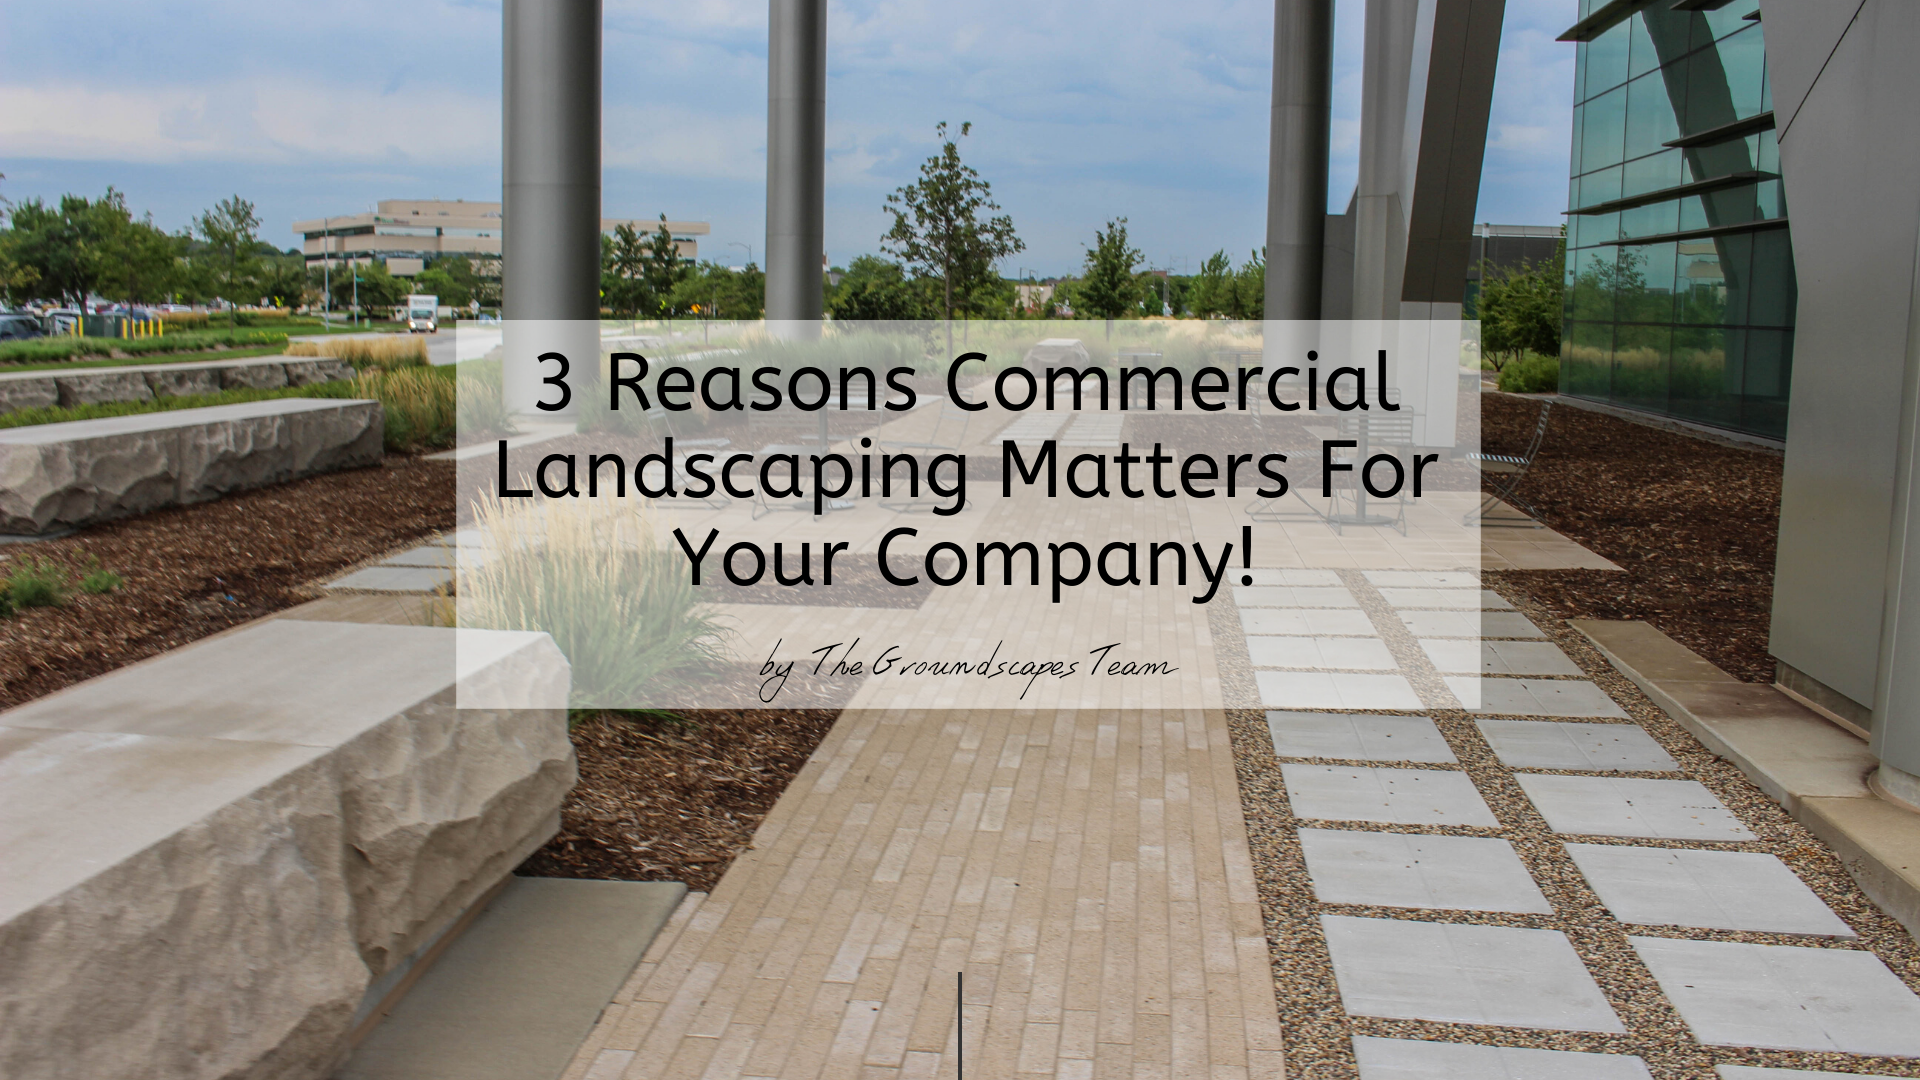 3 Reasons Commercial Landscaping Matters For Your Company!